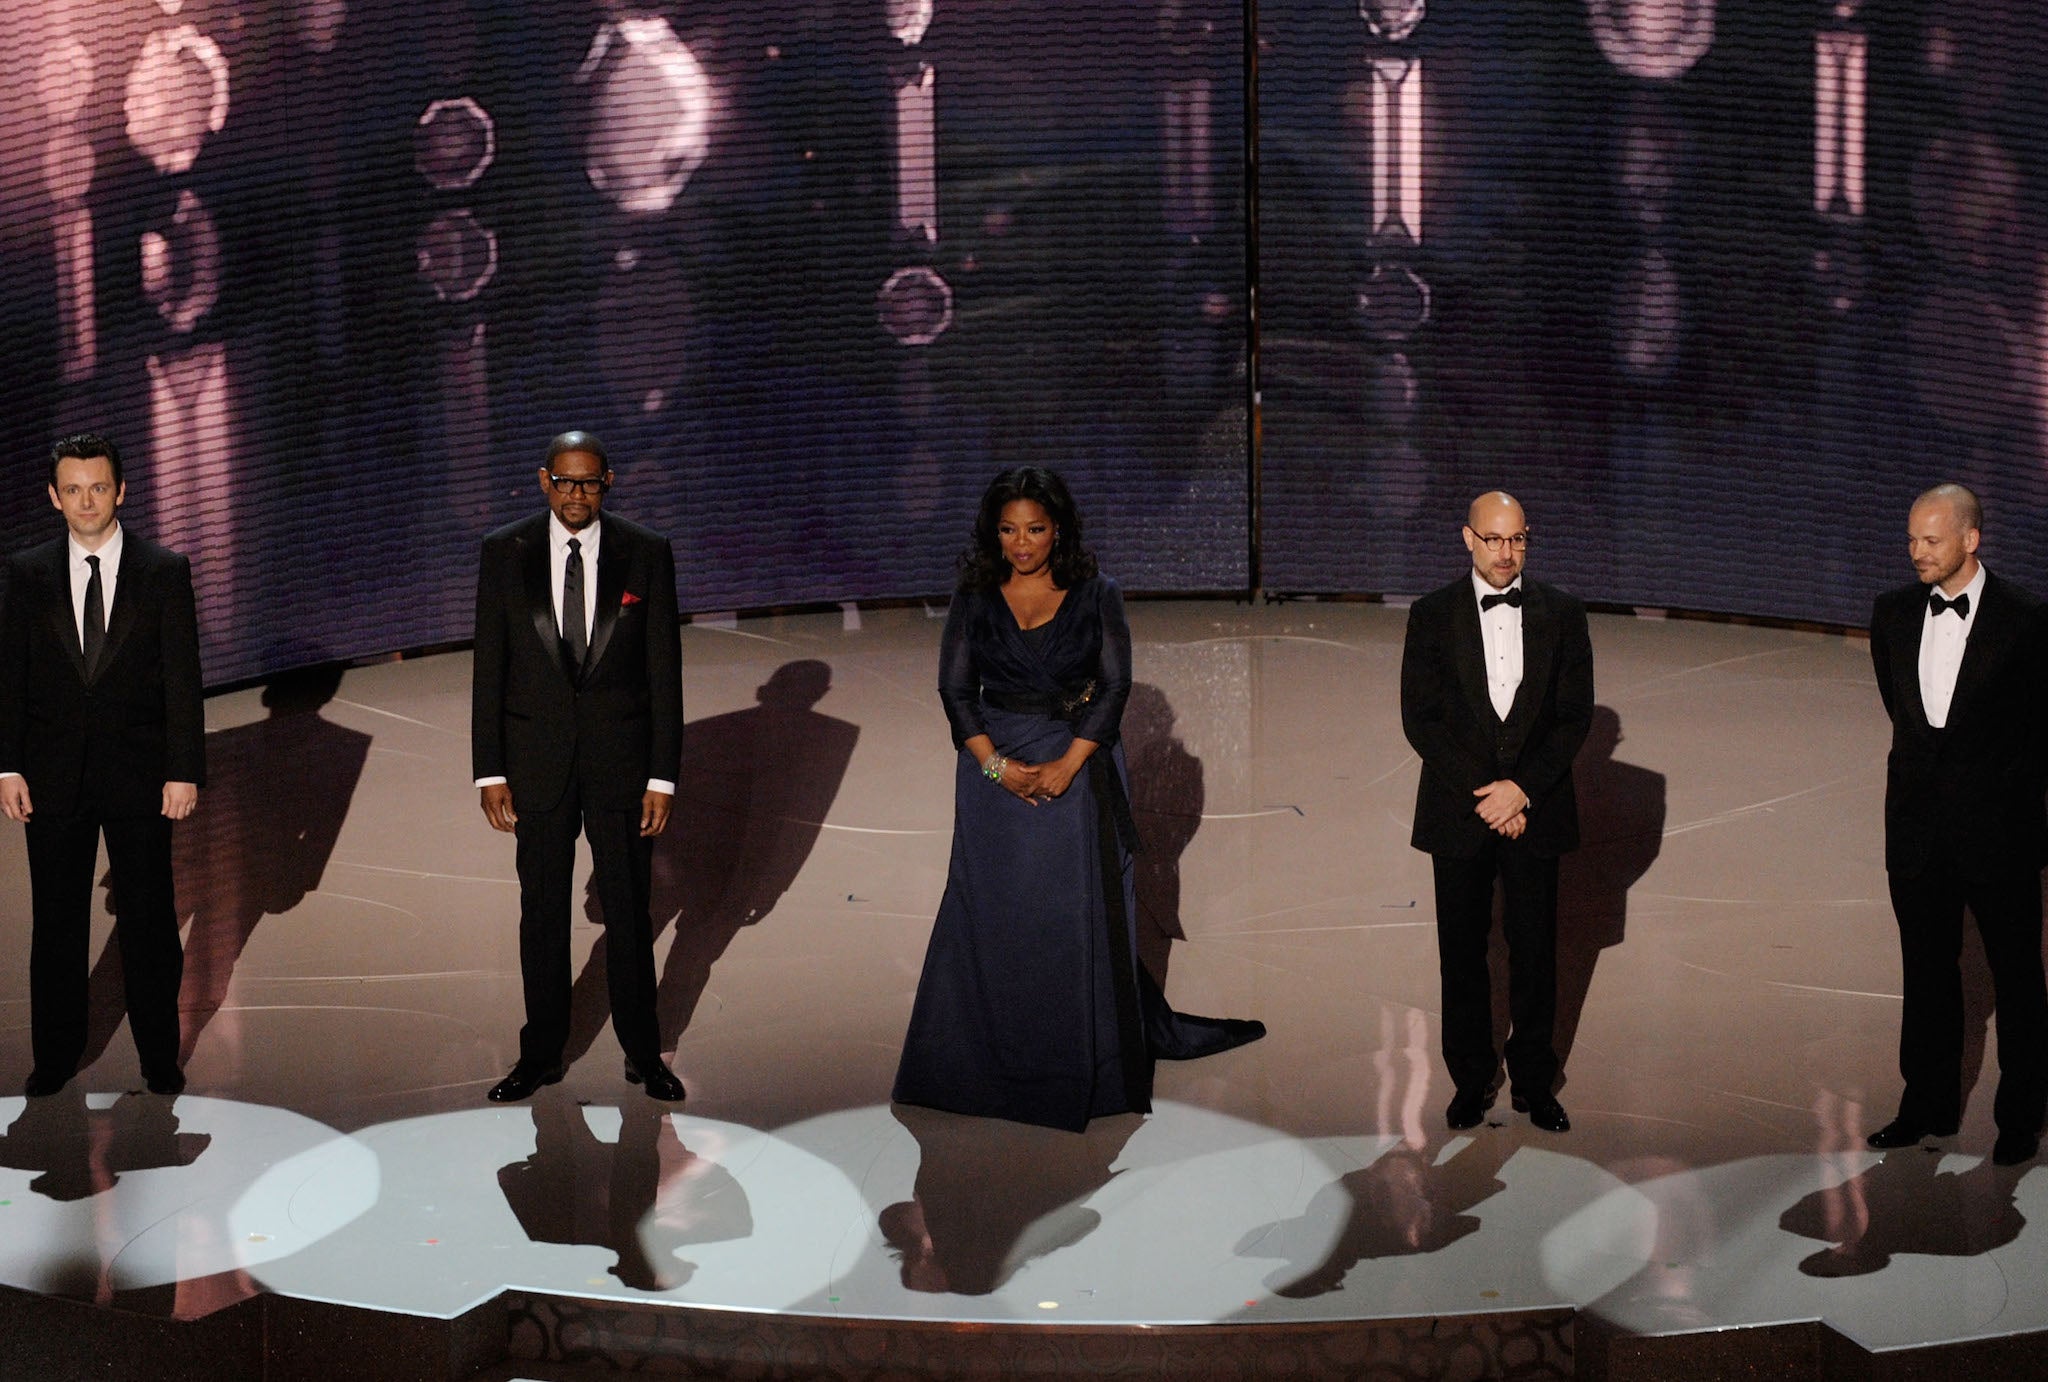 Michael Sheen, Forest Whitaker, Oprah Winfrey, Stanley Tucci, and Peter Saarsgard join forces to present Sandra Bullock as the Best Actress winner